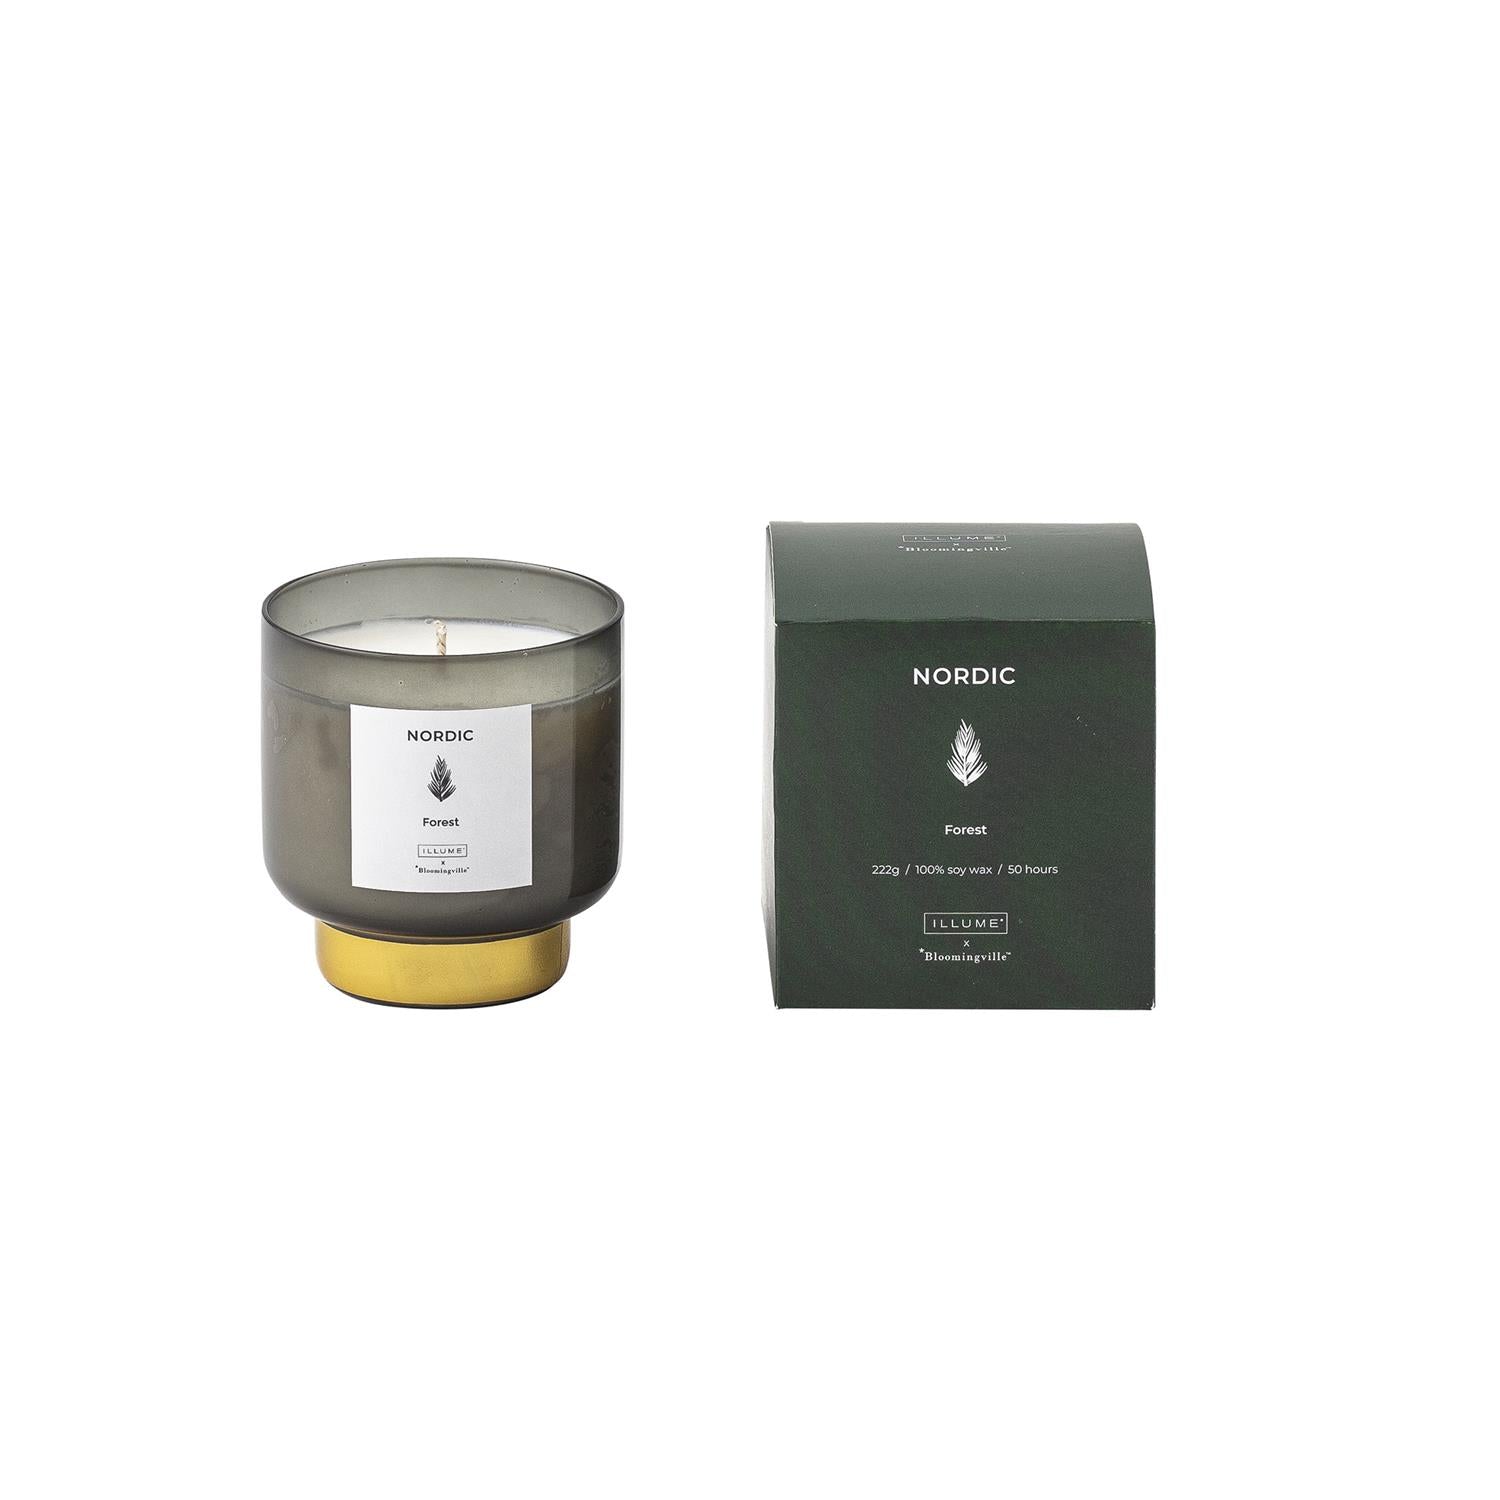 NORDIC FOREST SCENTED CANDLE SOY WAX